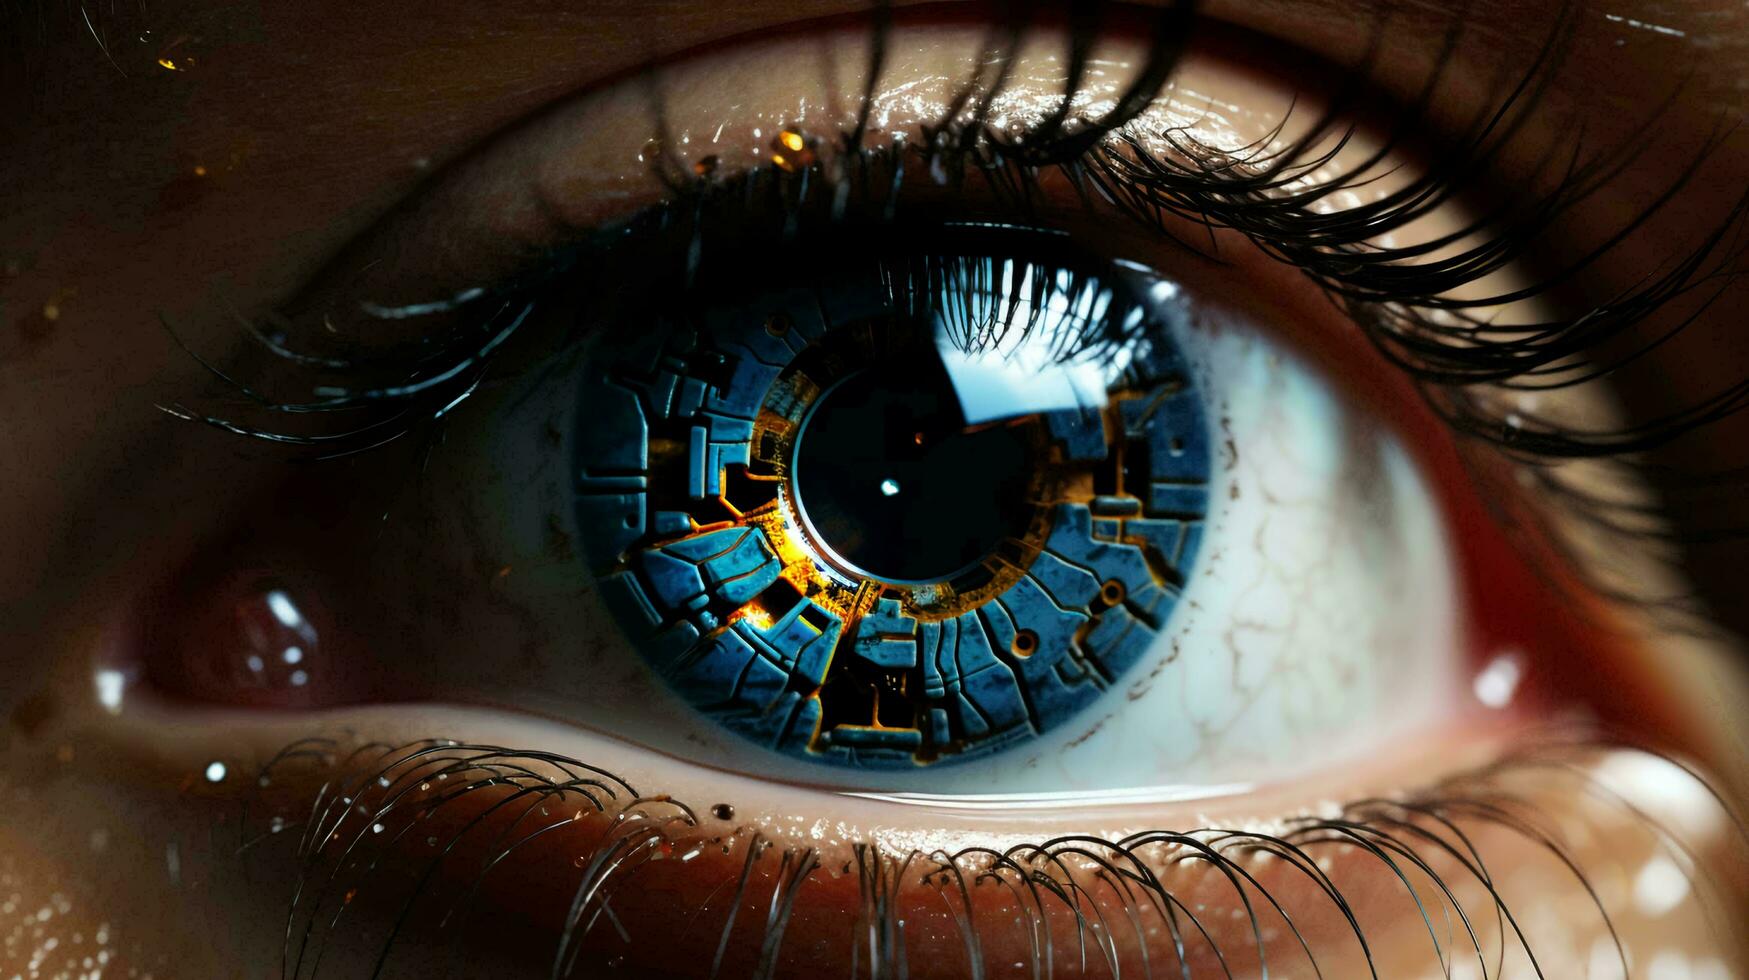 A close view of the high-tech eye. Retinal scanning for personal identification. Concept of laser vision correction, scanning and computer vision photo